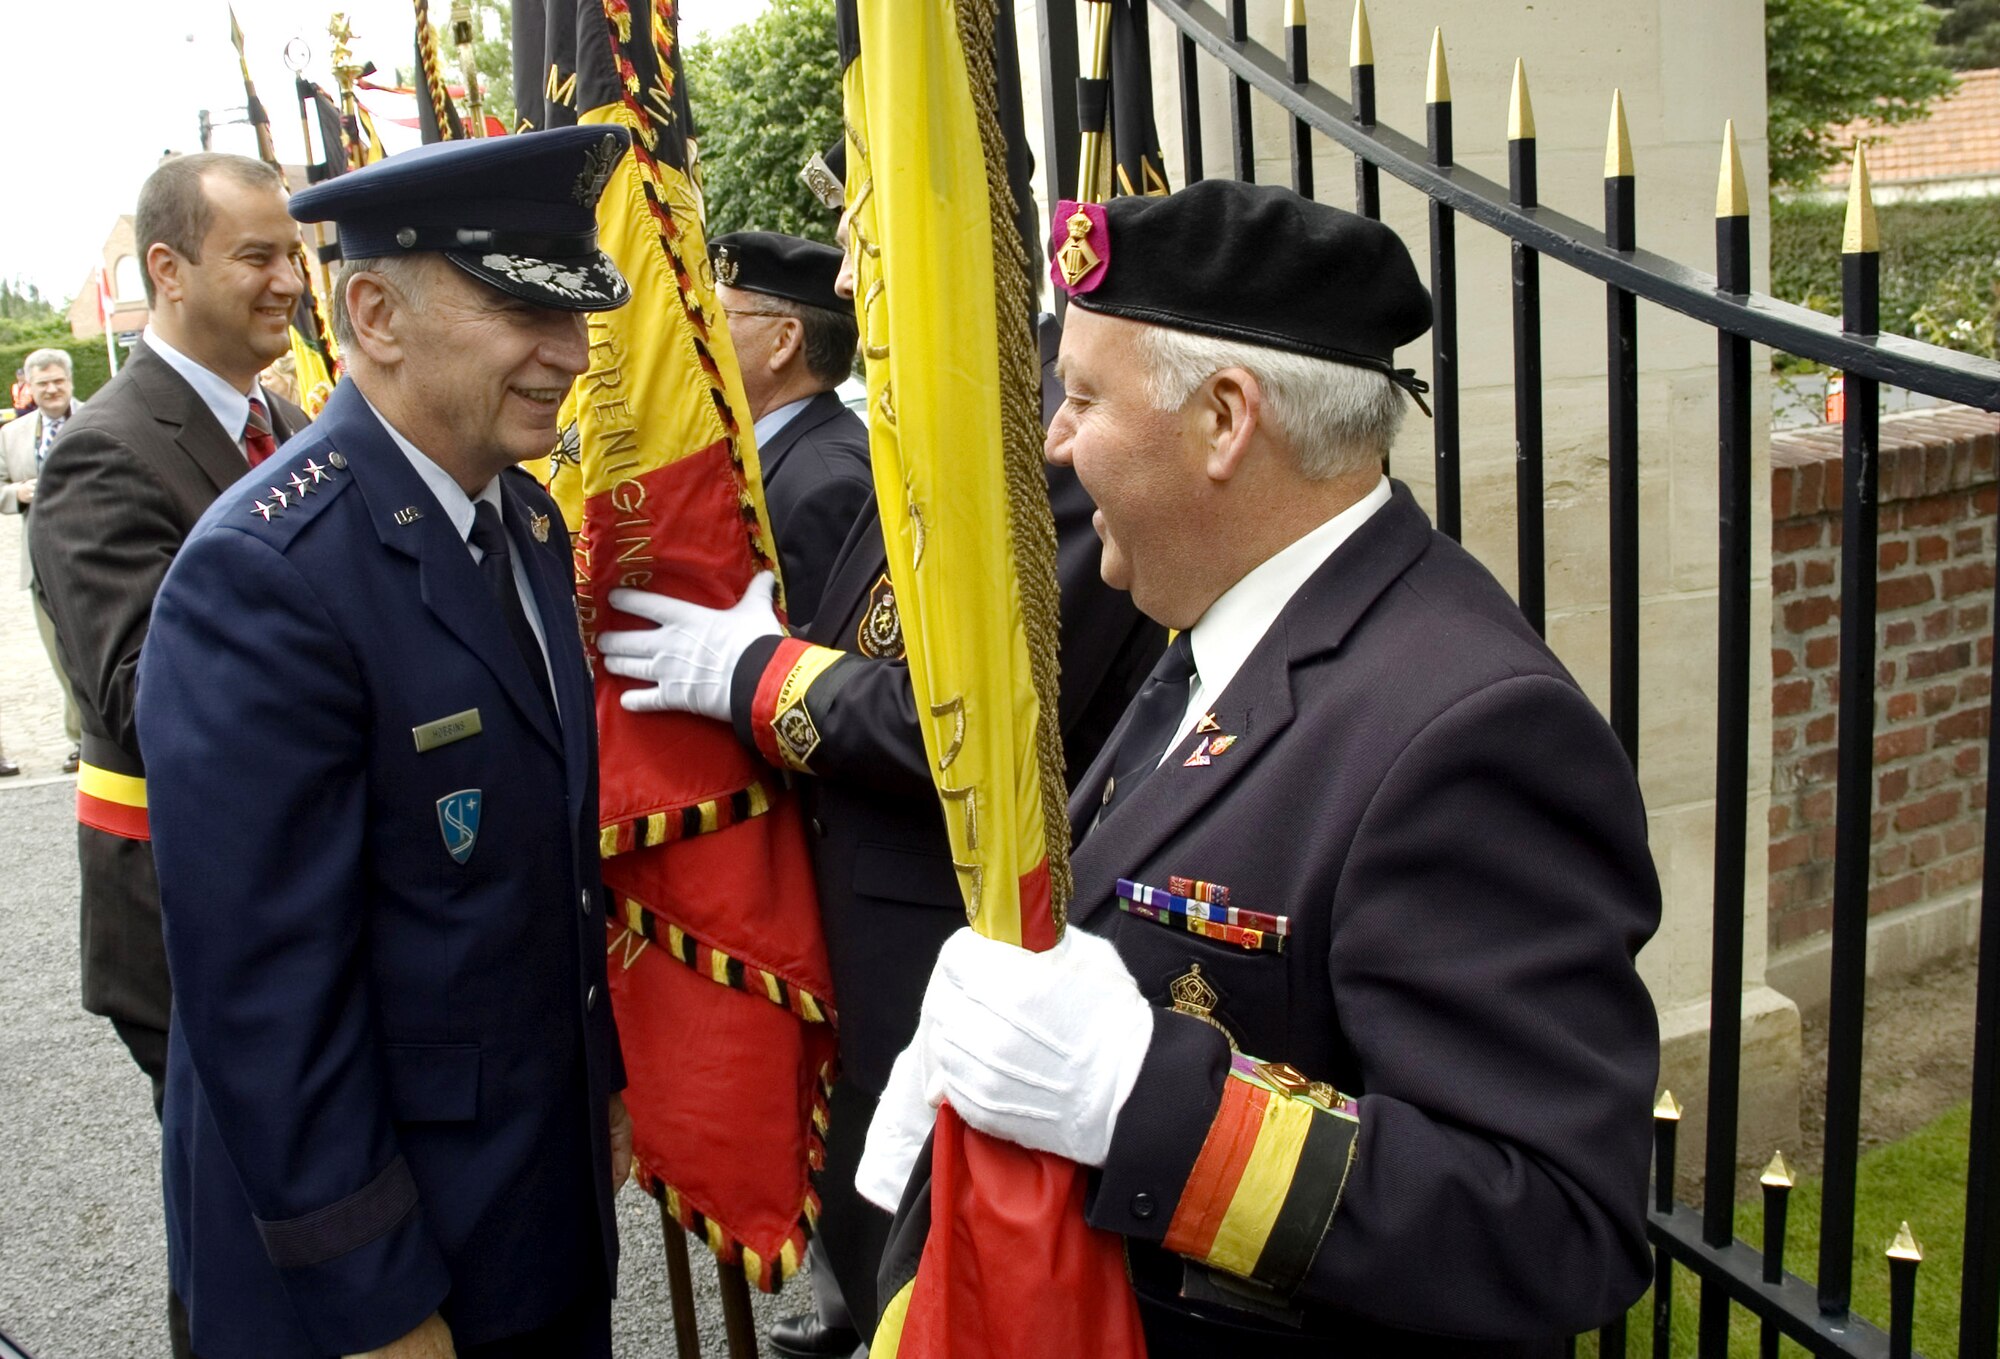 Gen. William T. Hobbins greets a ceremony participant May 27 at Flanders Field, Belgium. General Hobbins, the commander of U.S. Air Forces in Europe, paid tribute to the 368 servicemembers buried there who died in battle while liberating Belgium during World War II. (U.S. Air Force photo/Staff Sgt. Dan Bellis) 
